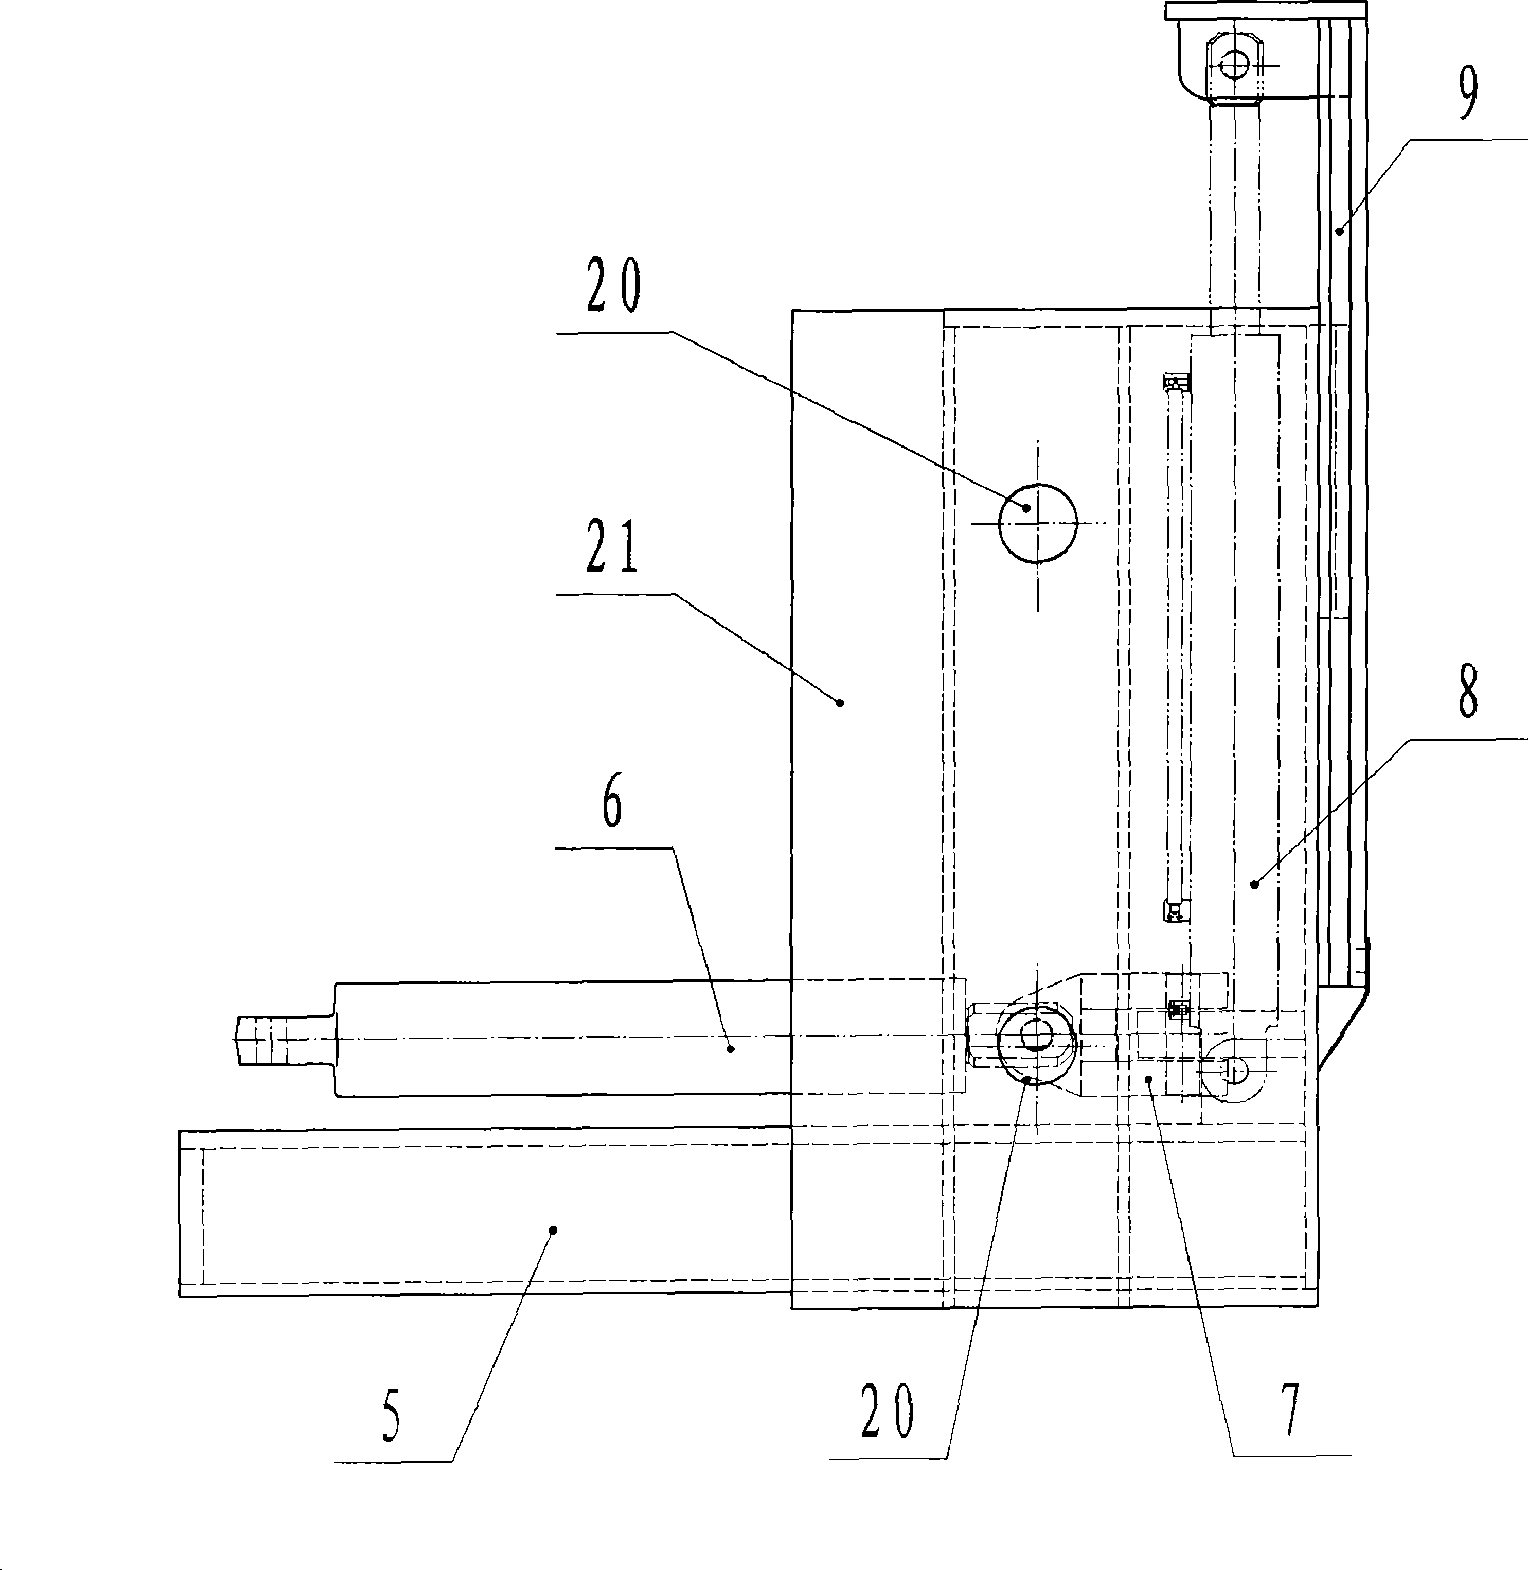 Formwork support with filling behind support